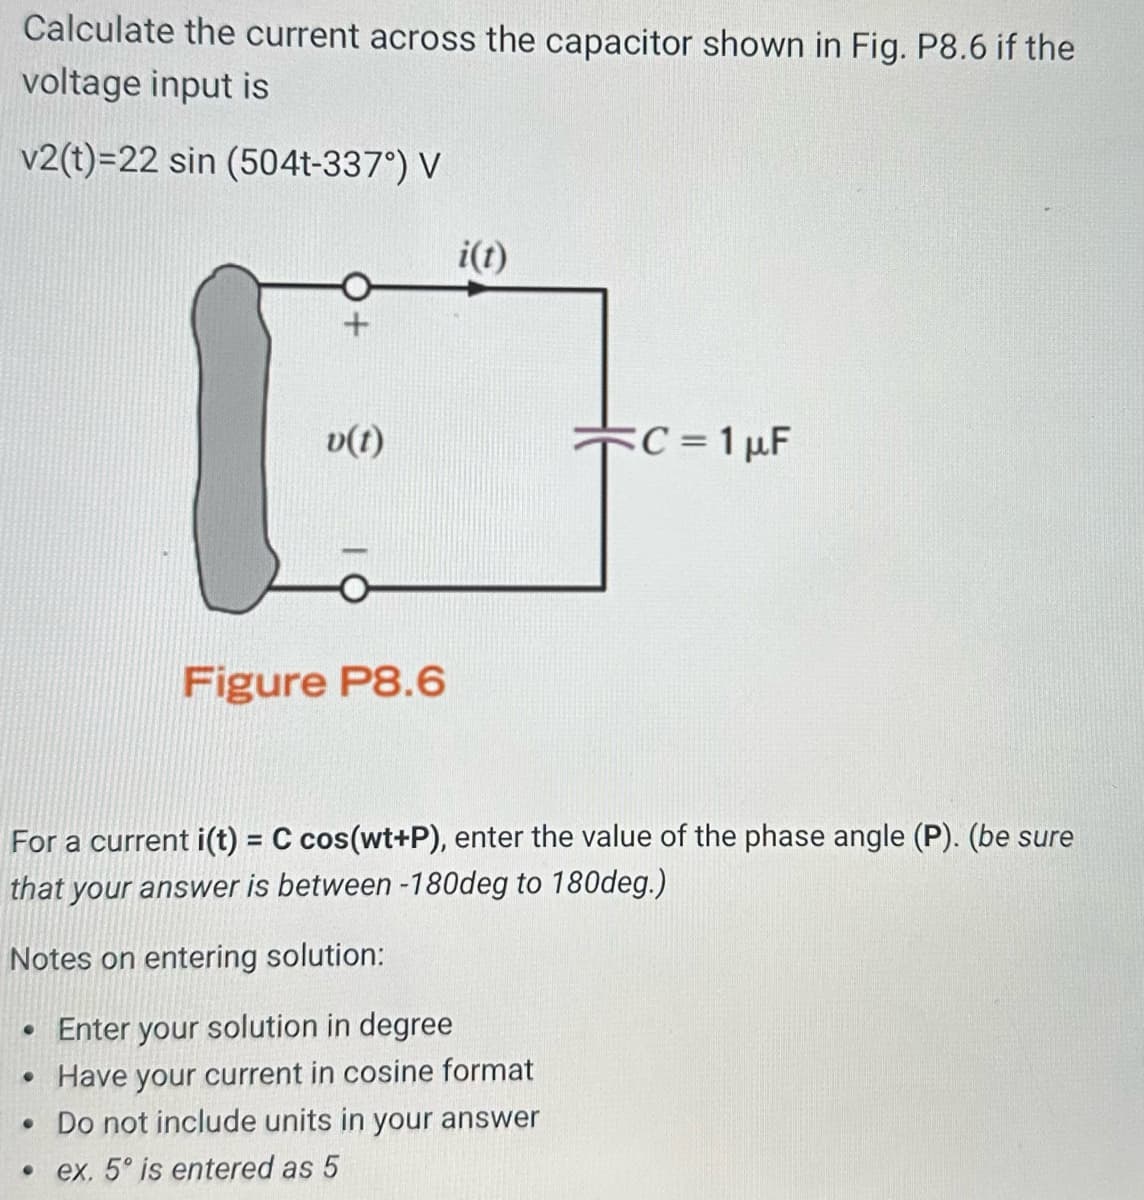 Calculate the current across the capacitor shown in Fig. P8.6 if the
voltage input is
v2(t)=22 sin (504t-337°) V
+
v(t)
Figure P8.6
i(t)
C = 1 µF
For a current i(t) = C cos(wt+P), enter the value of the phase angle (P). (be sure
that your answer is between -180deg to 180deg.)
Notes on entering solution:
• Enter your solution in degree
• Have your current in cosine format
. Do not include units in your answer
.ex. 5° is entered as 5